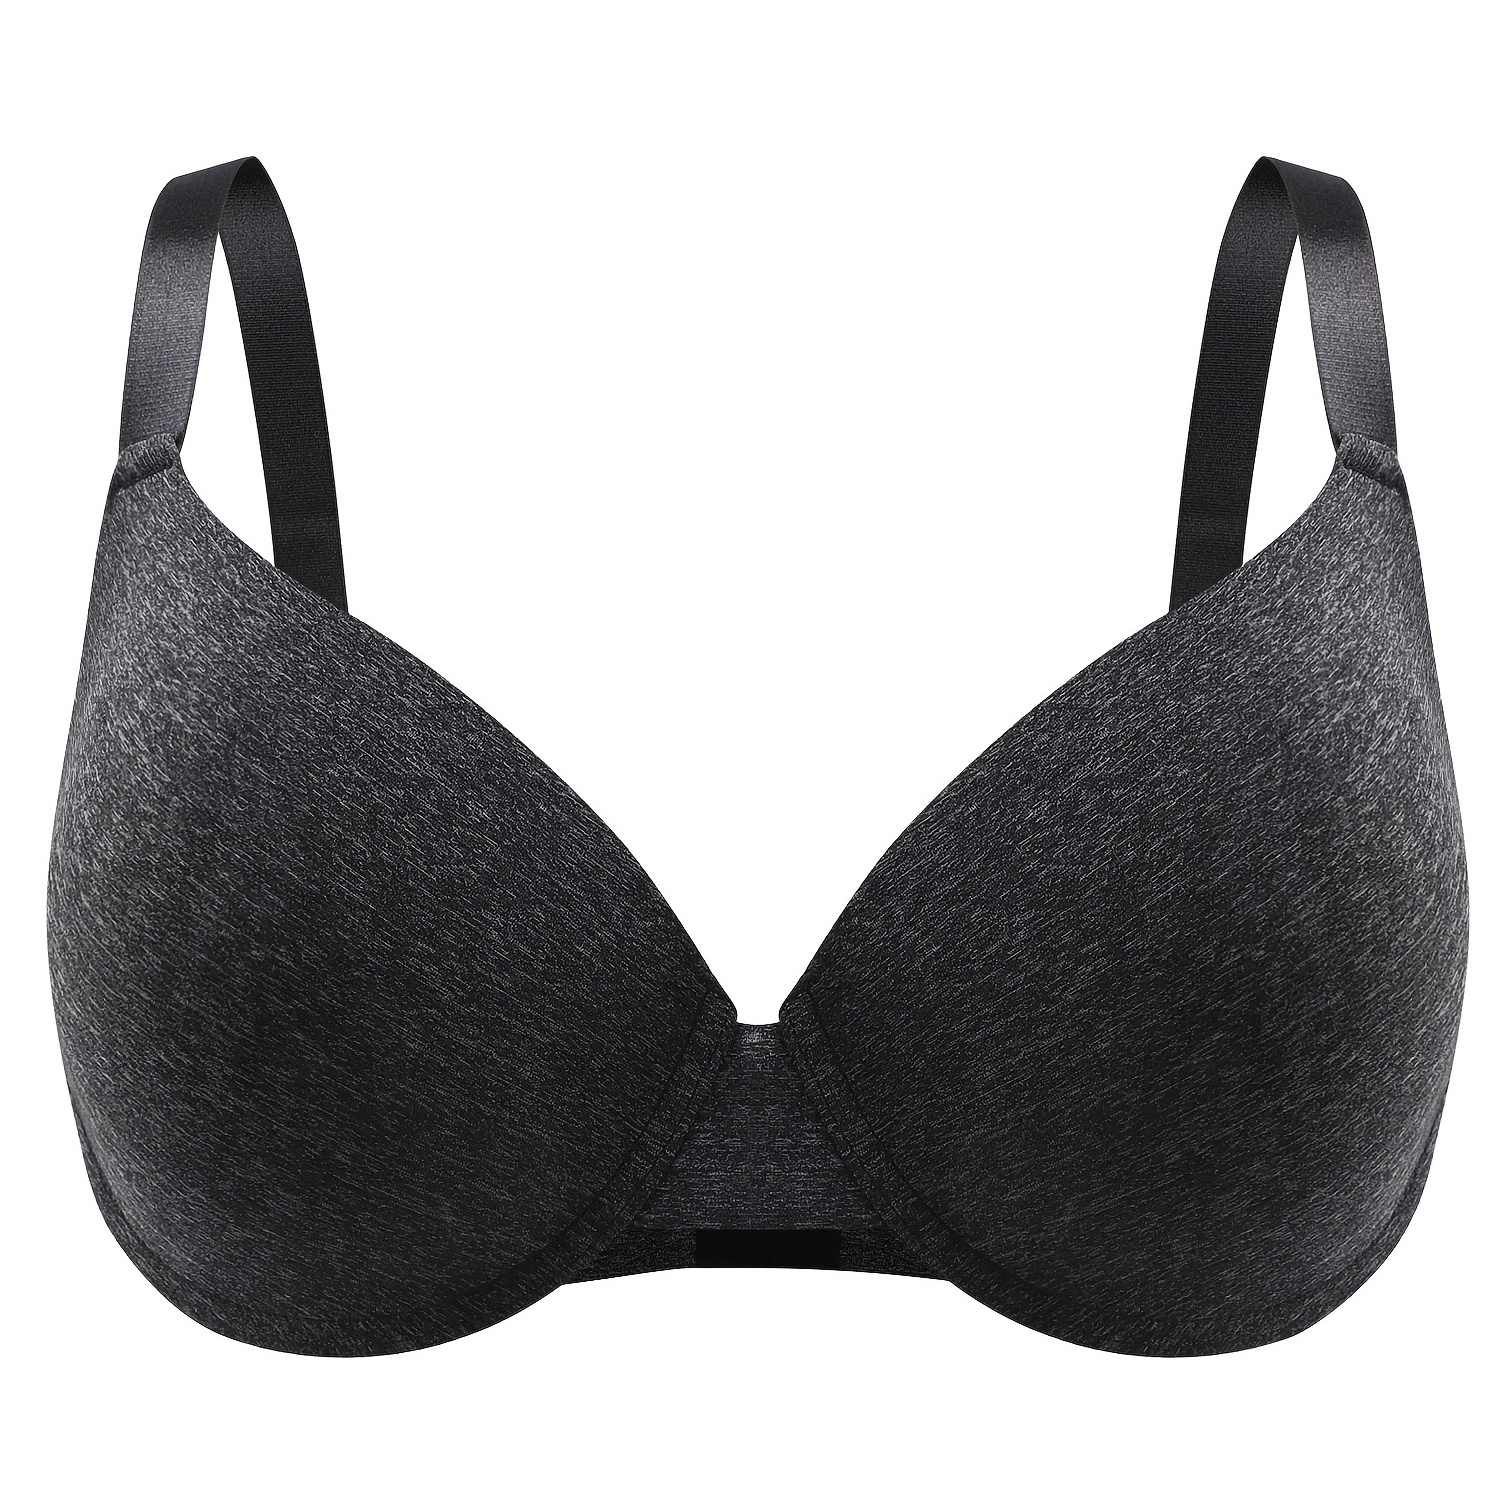 

Plus Size Bras For Women, Comfortable T-shirt Bra, Women's Lingerie, Smooth And Lightweight, Underwire